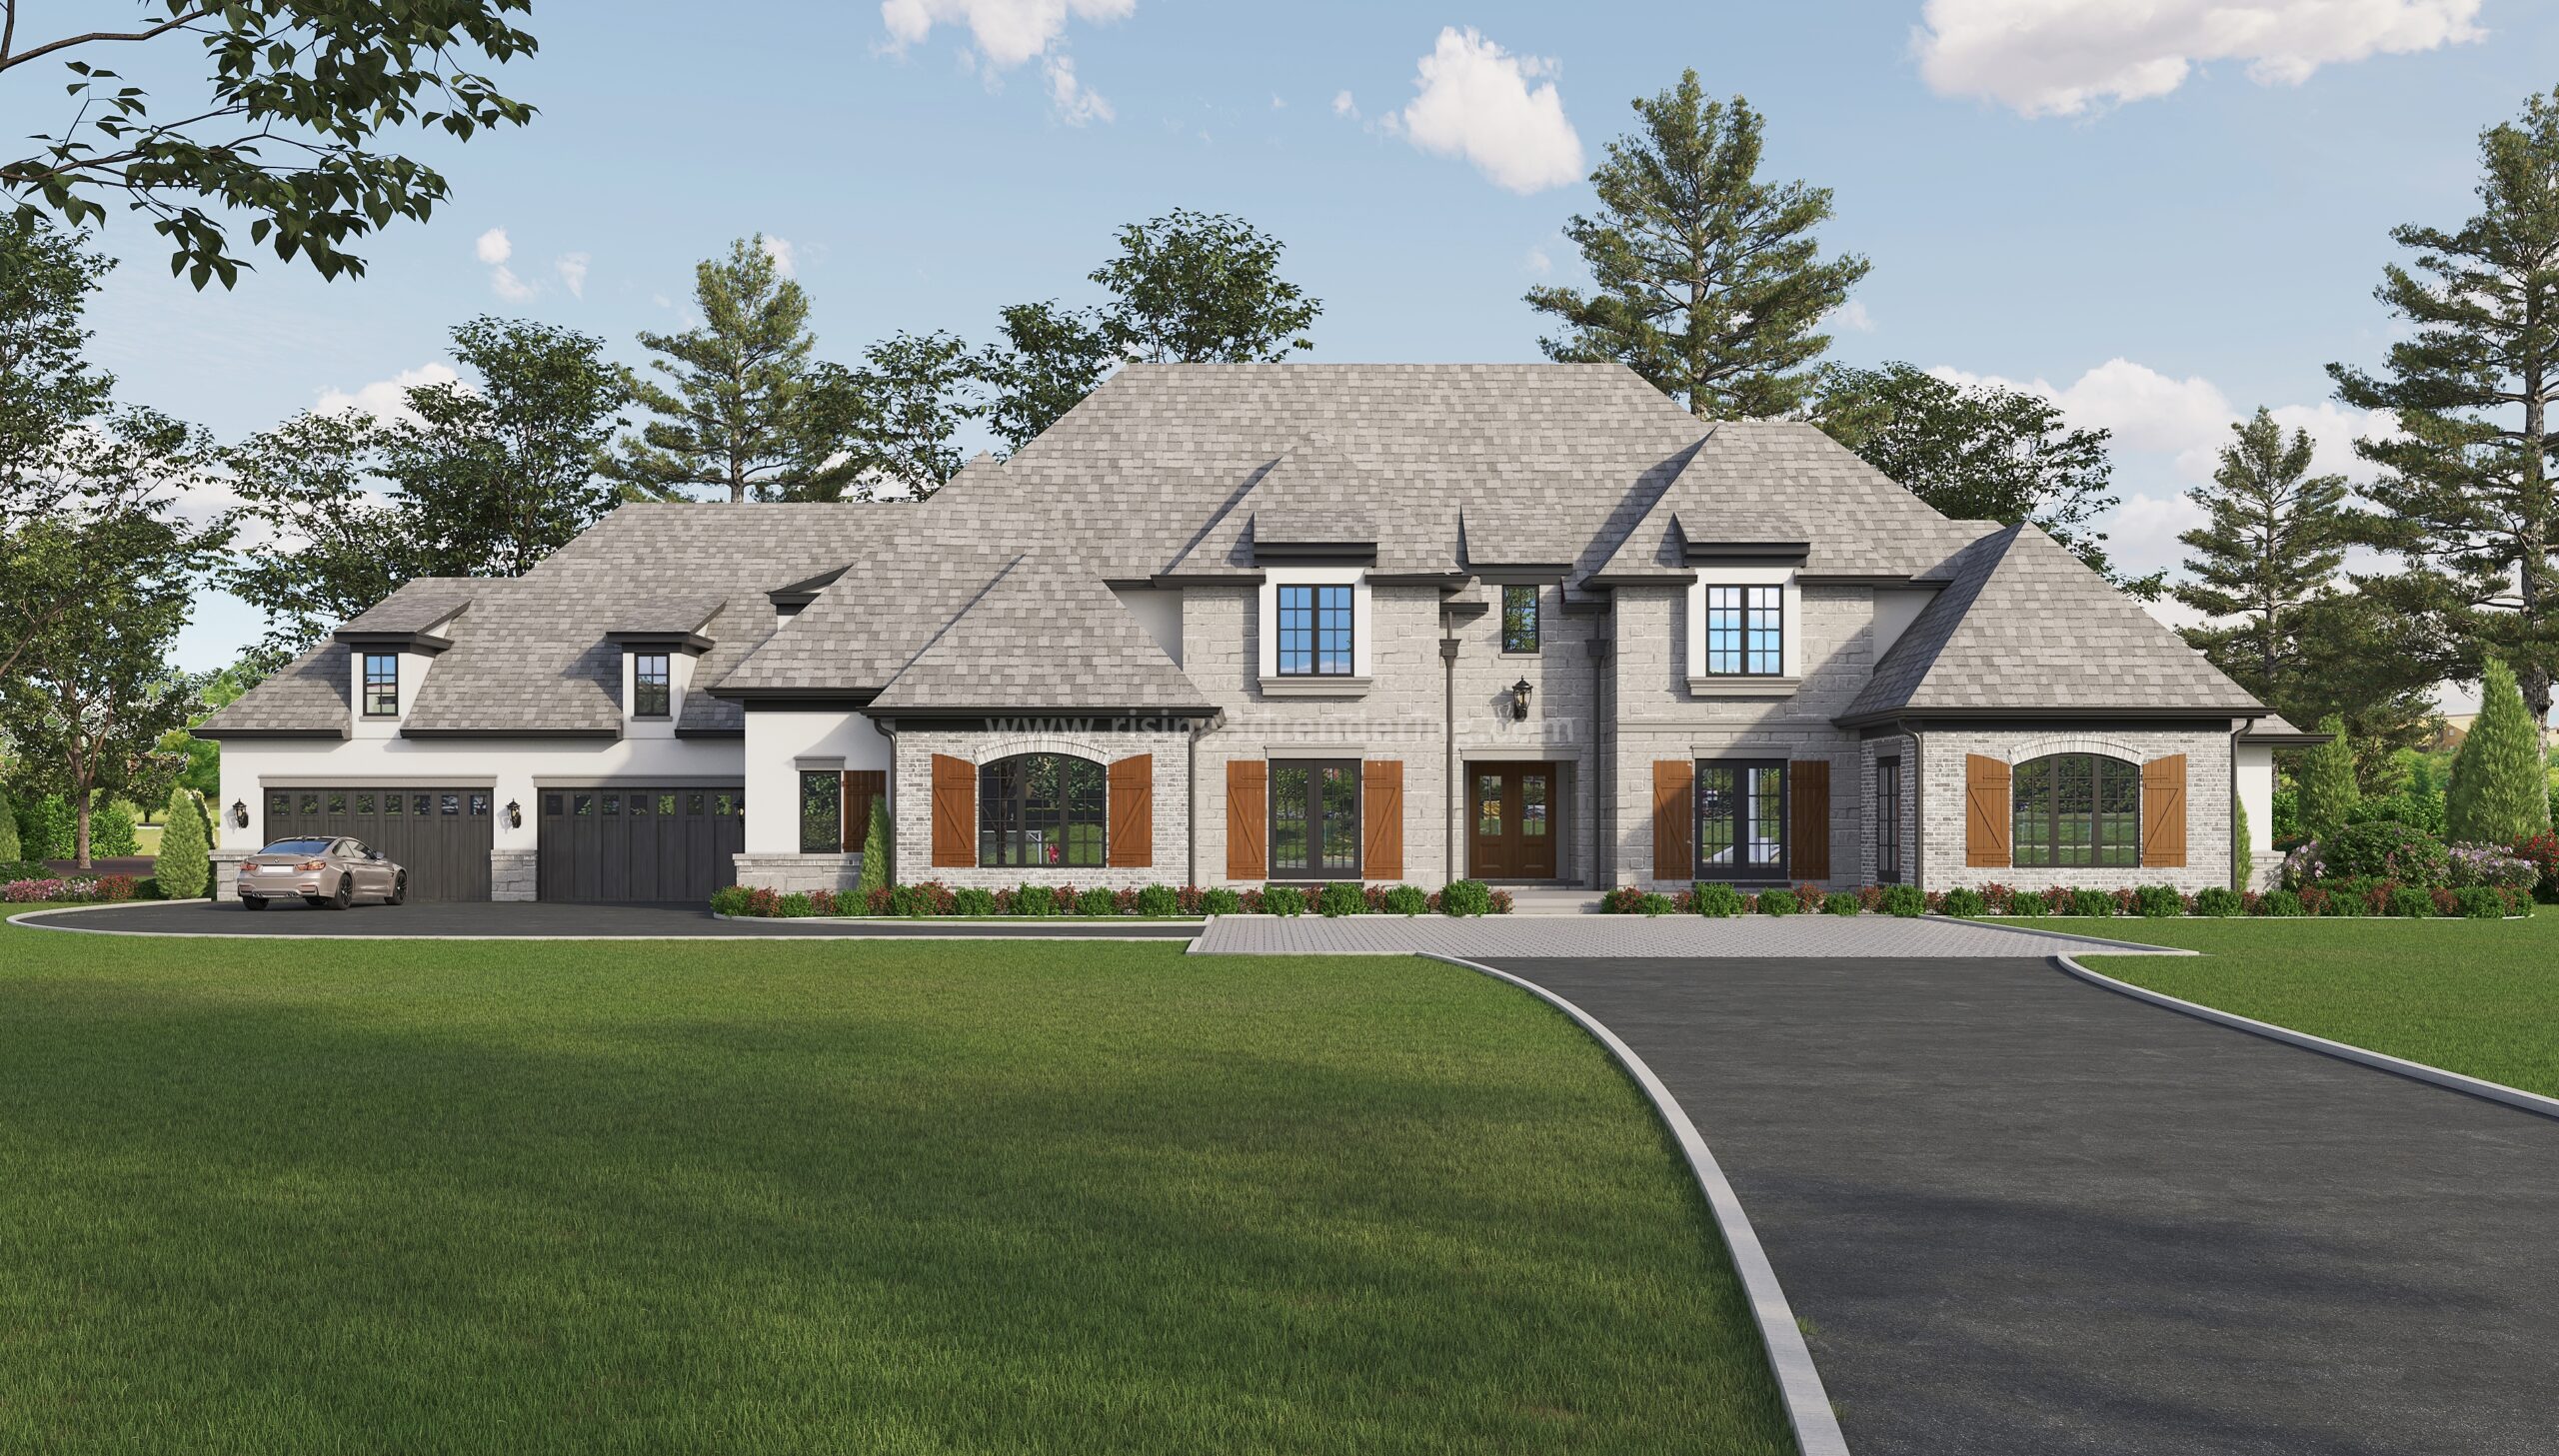 Landscape Bungalow Exterior Designs in a Natural Setting by Rising 3D Visualization Company